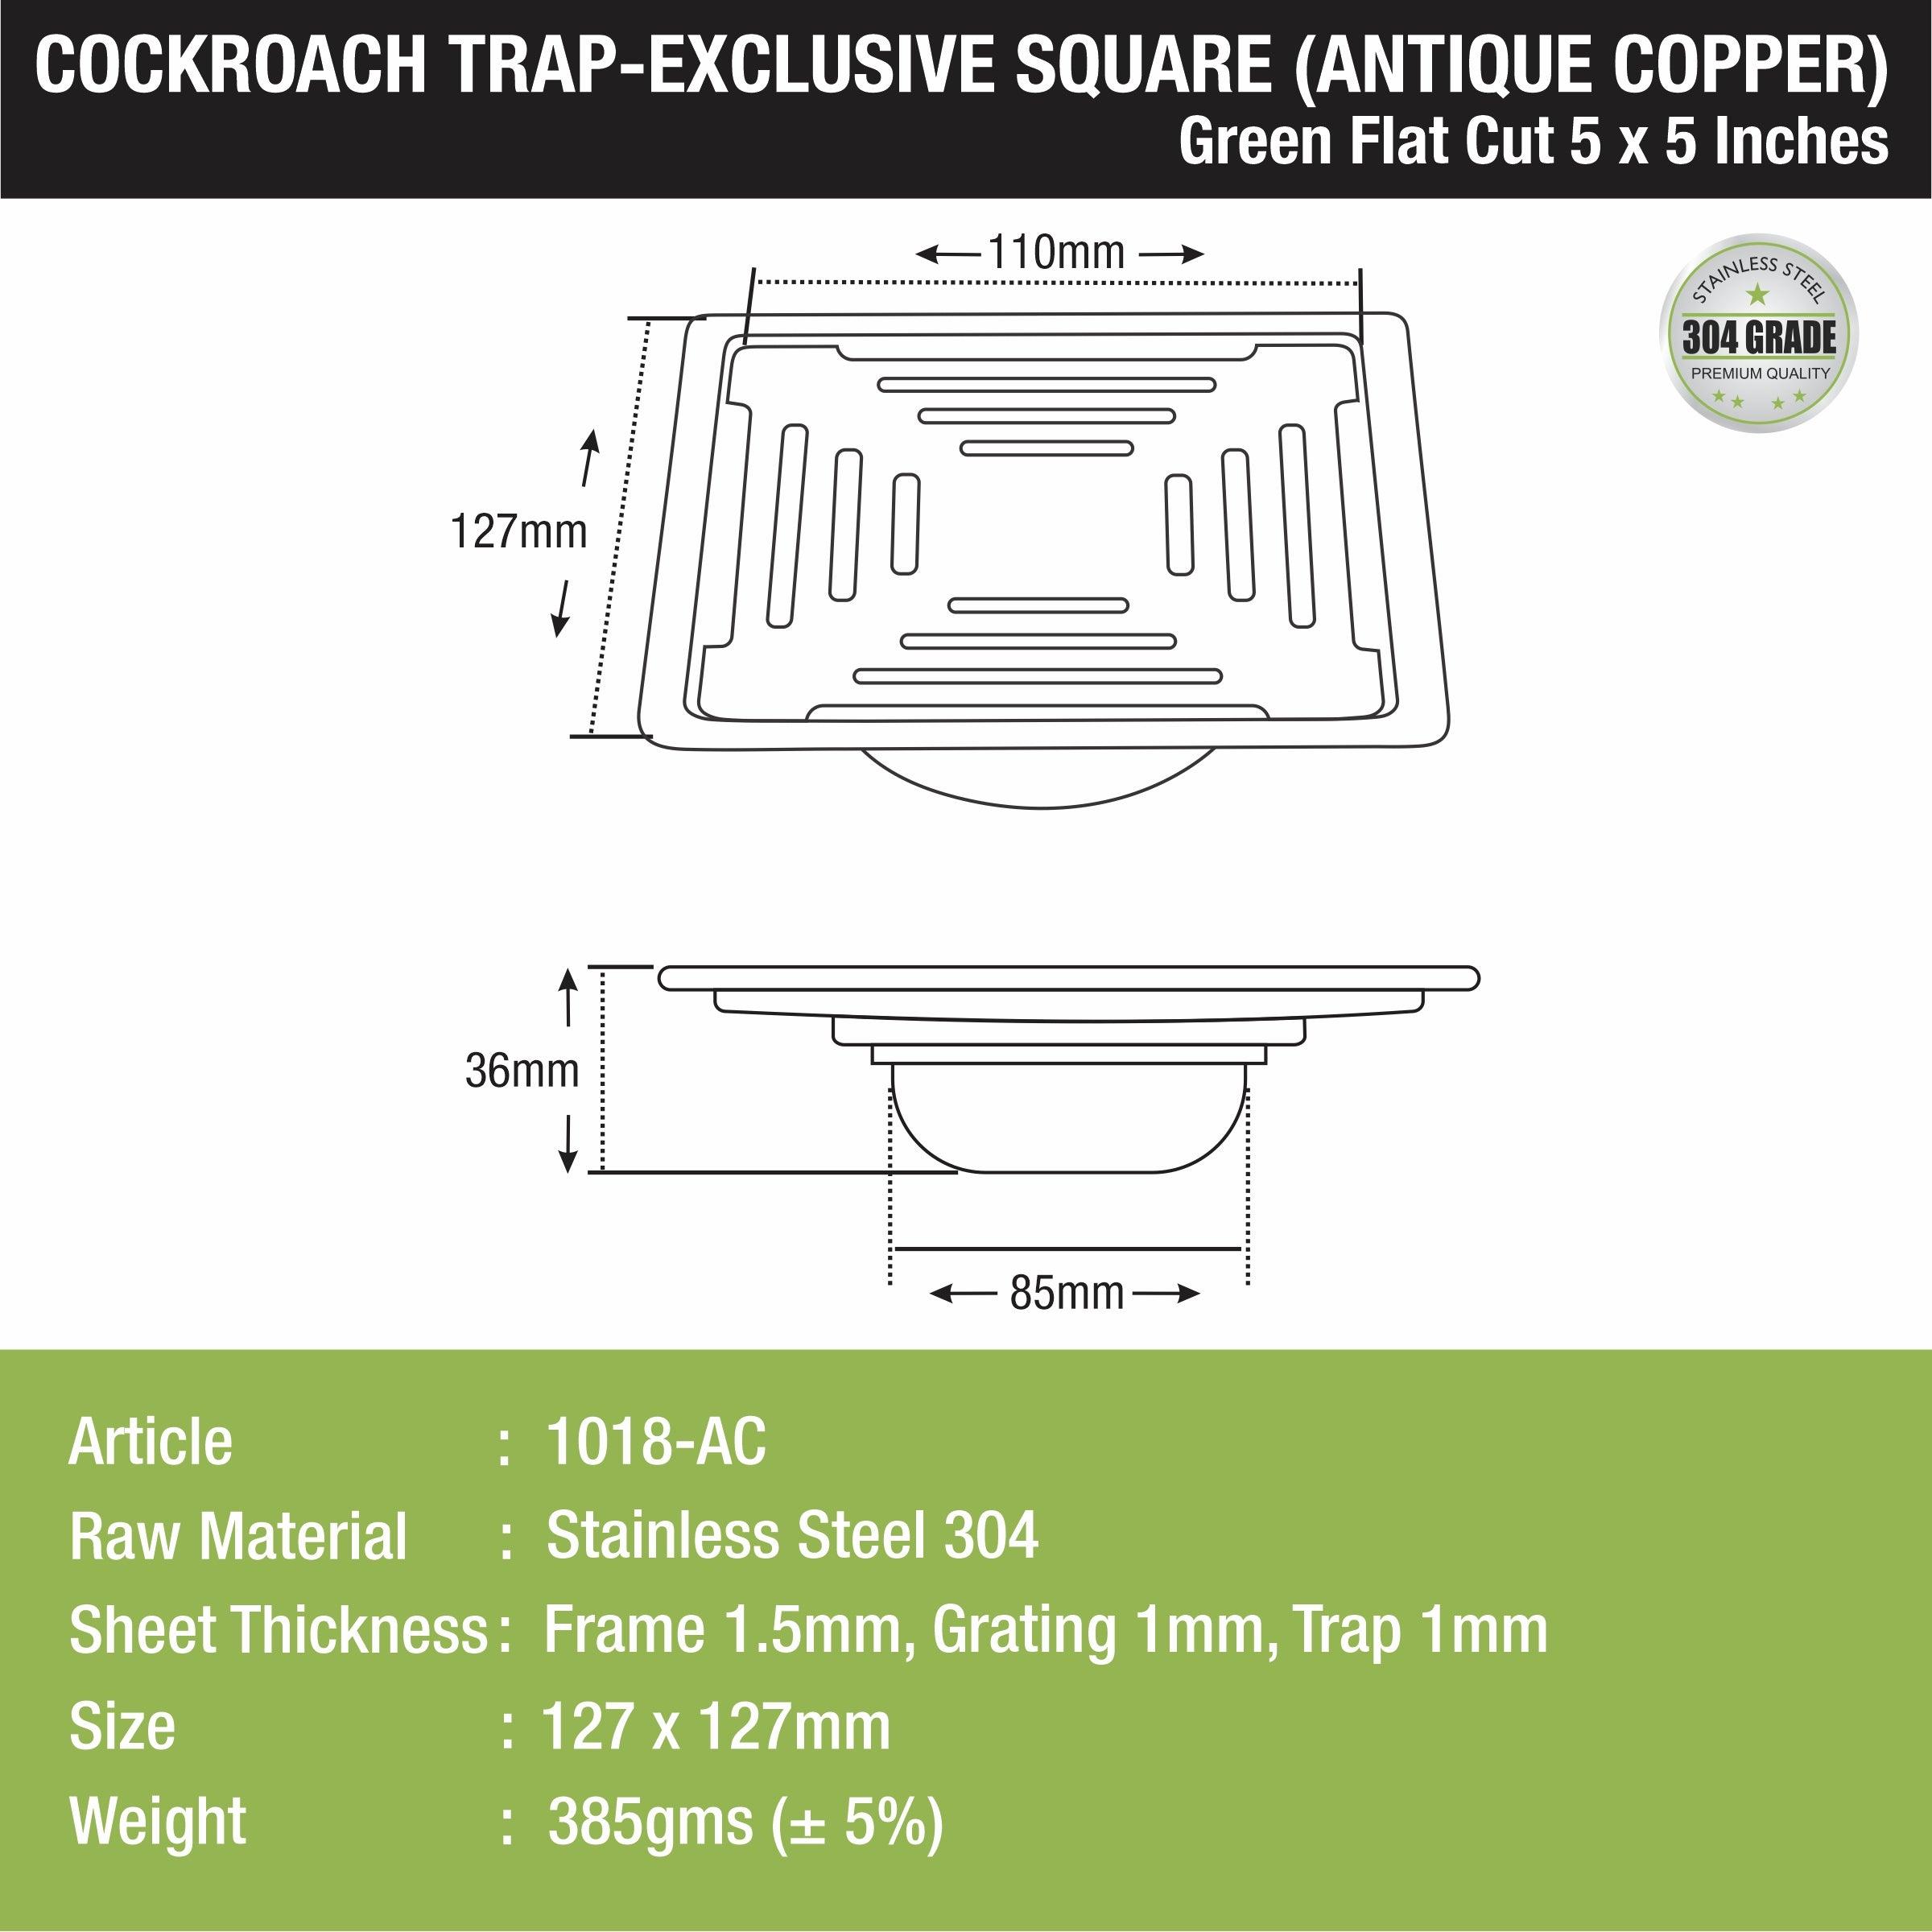 Green Exclusive Square Flat Cut Floor Drain in Antique Copper PVD Coating (5 x 5 Inches) with Cockroach Trap sizes and dimensions